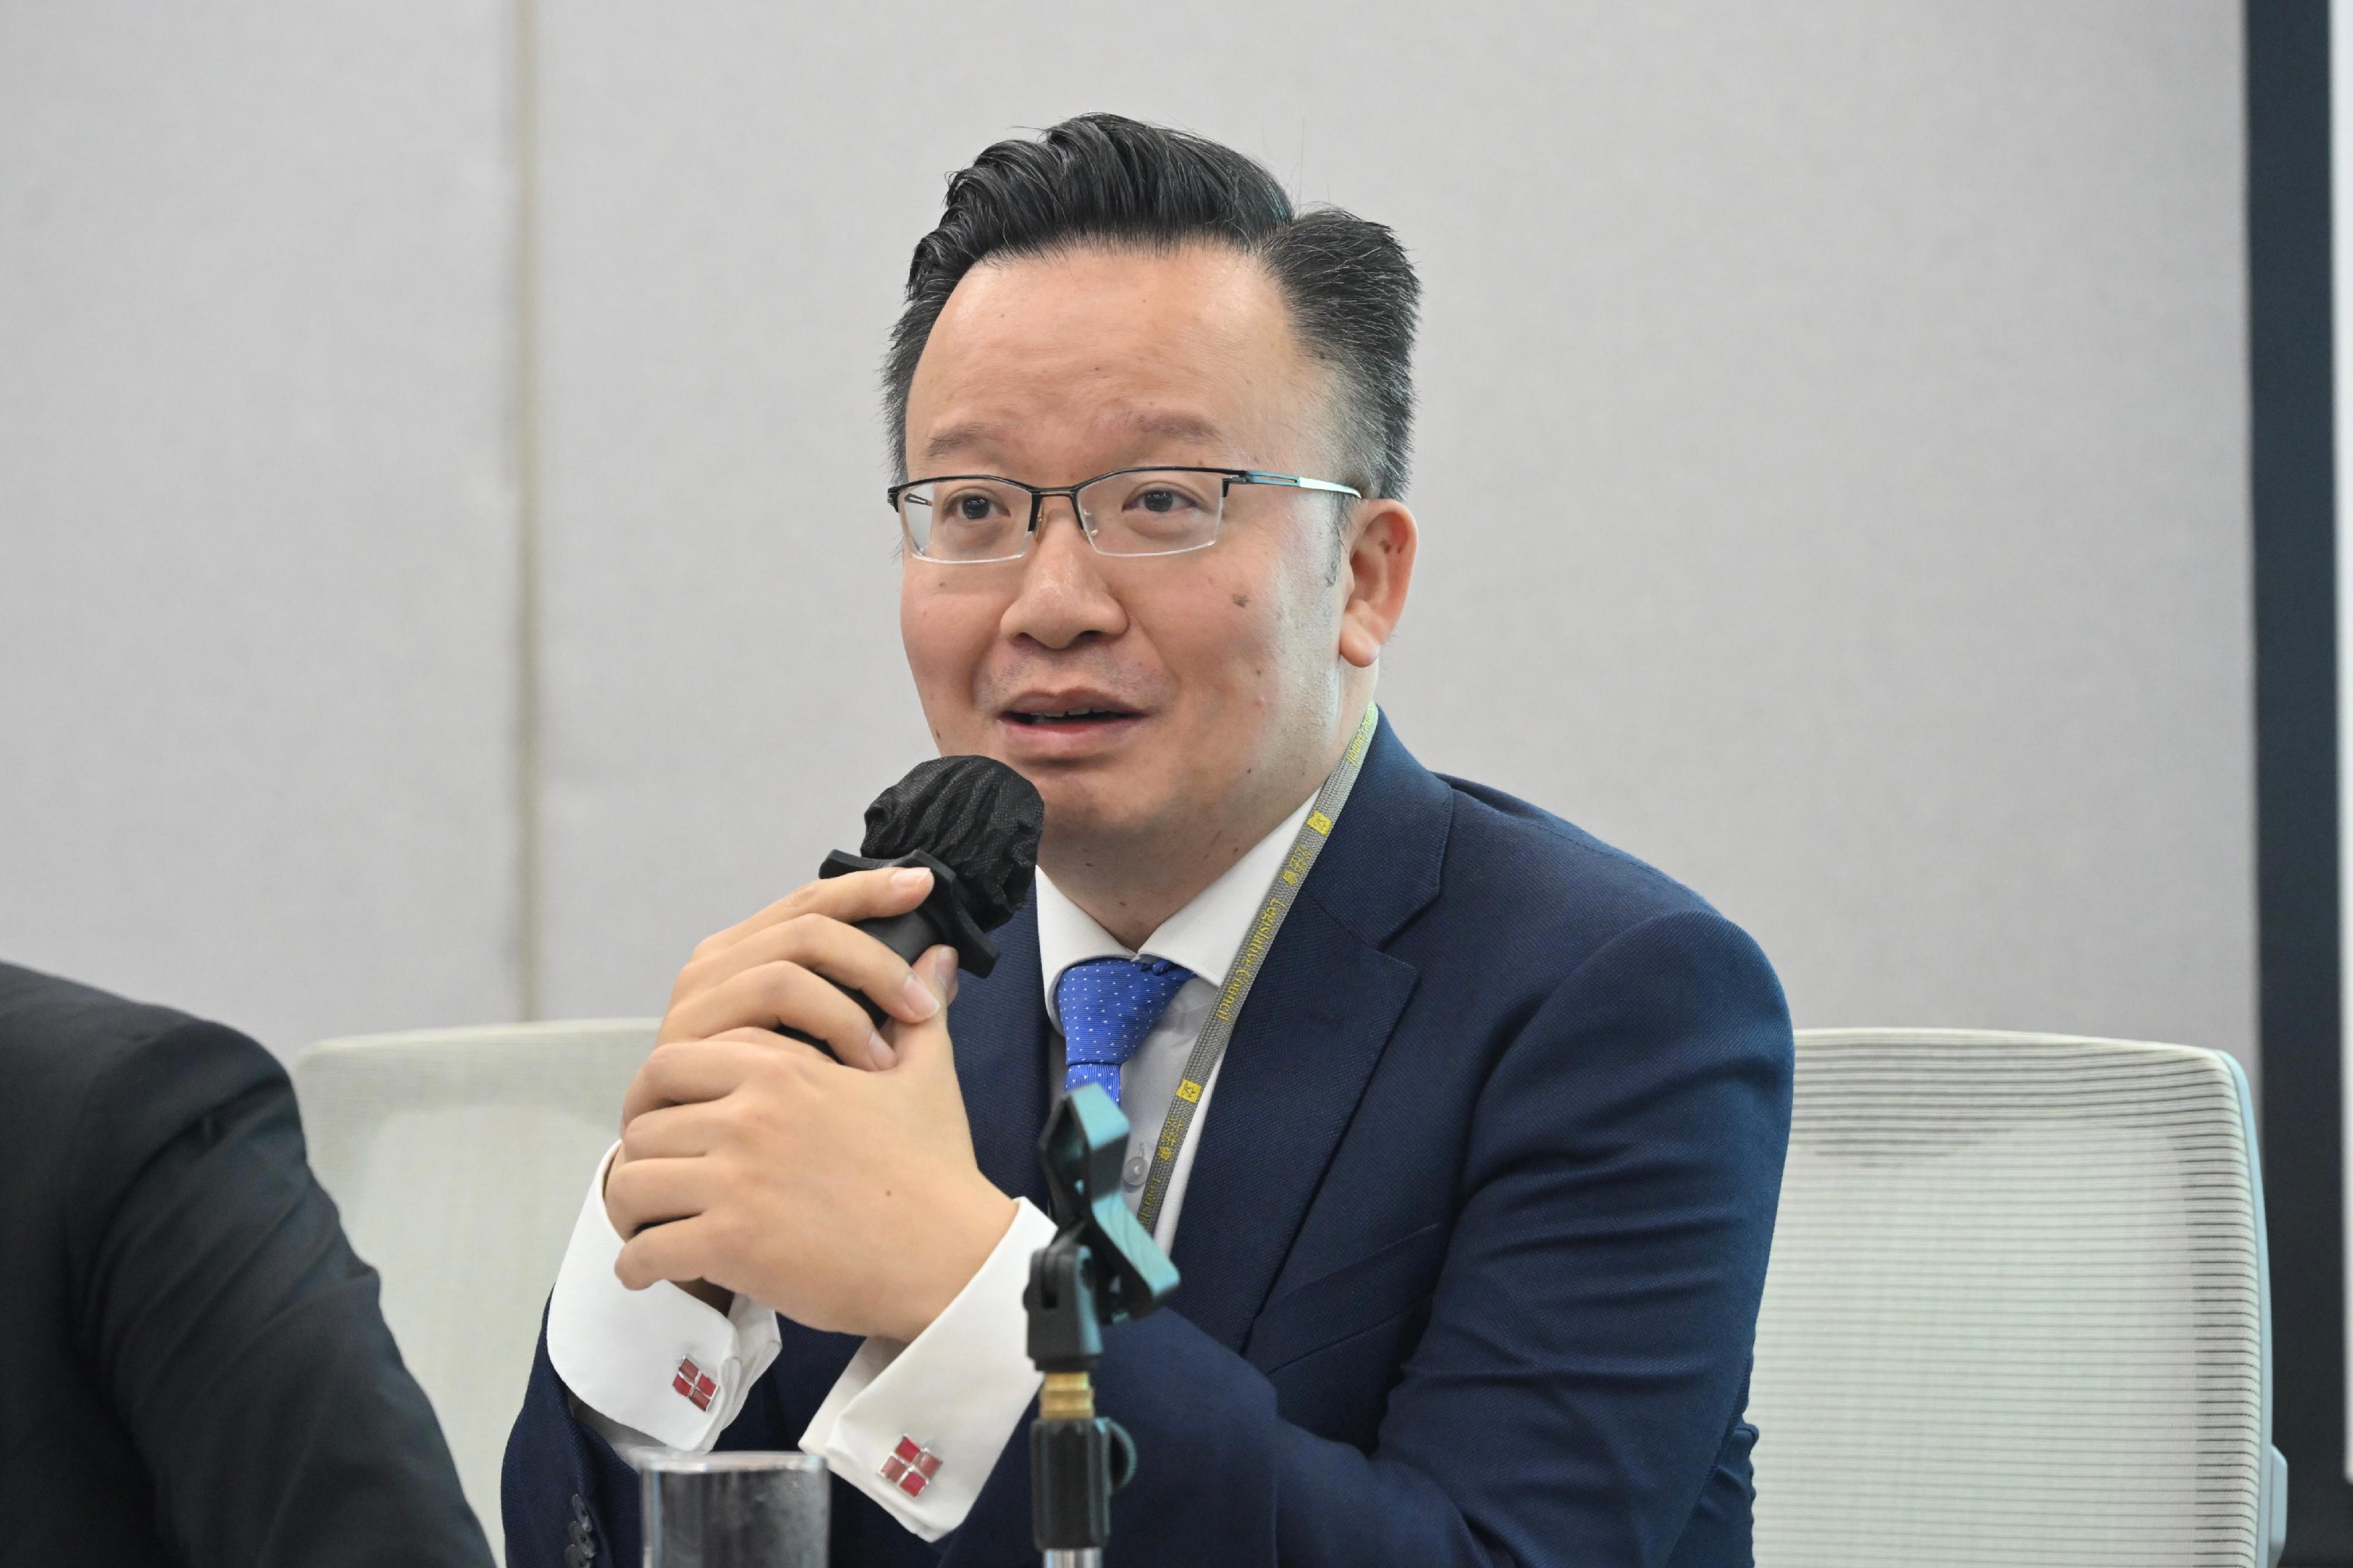 The Chief Executive's Policy Unit today (April 10) held a seminar to tap the insights of its Expert Group on the "two sessions" for Hong Kong. Photo shows Hong Kong Deputy to the National People's Congress, Mr Nicholas Chan, sharing his takeaways in attending the "two sessions".

